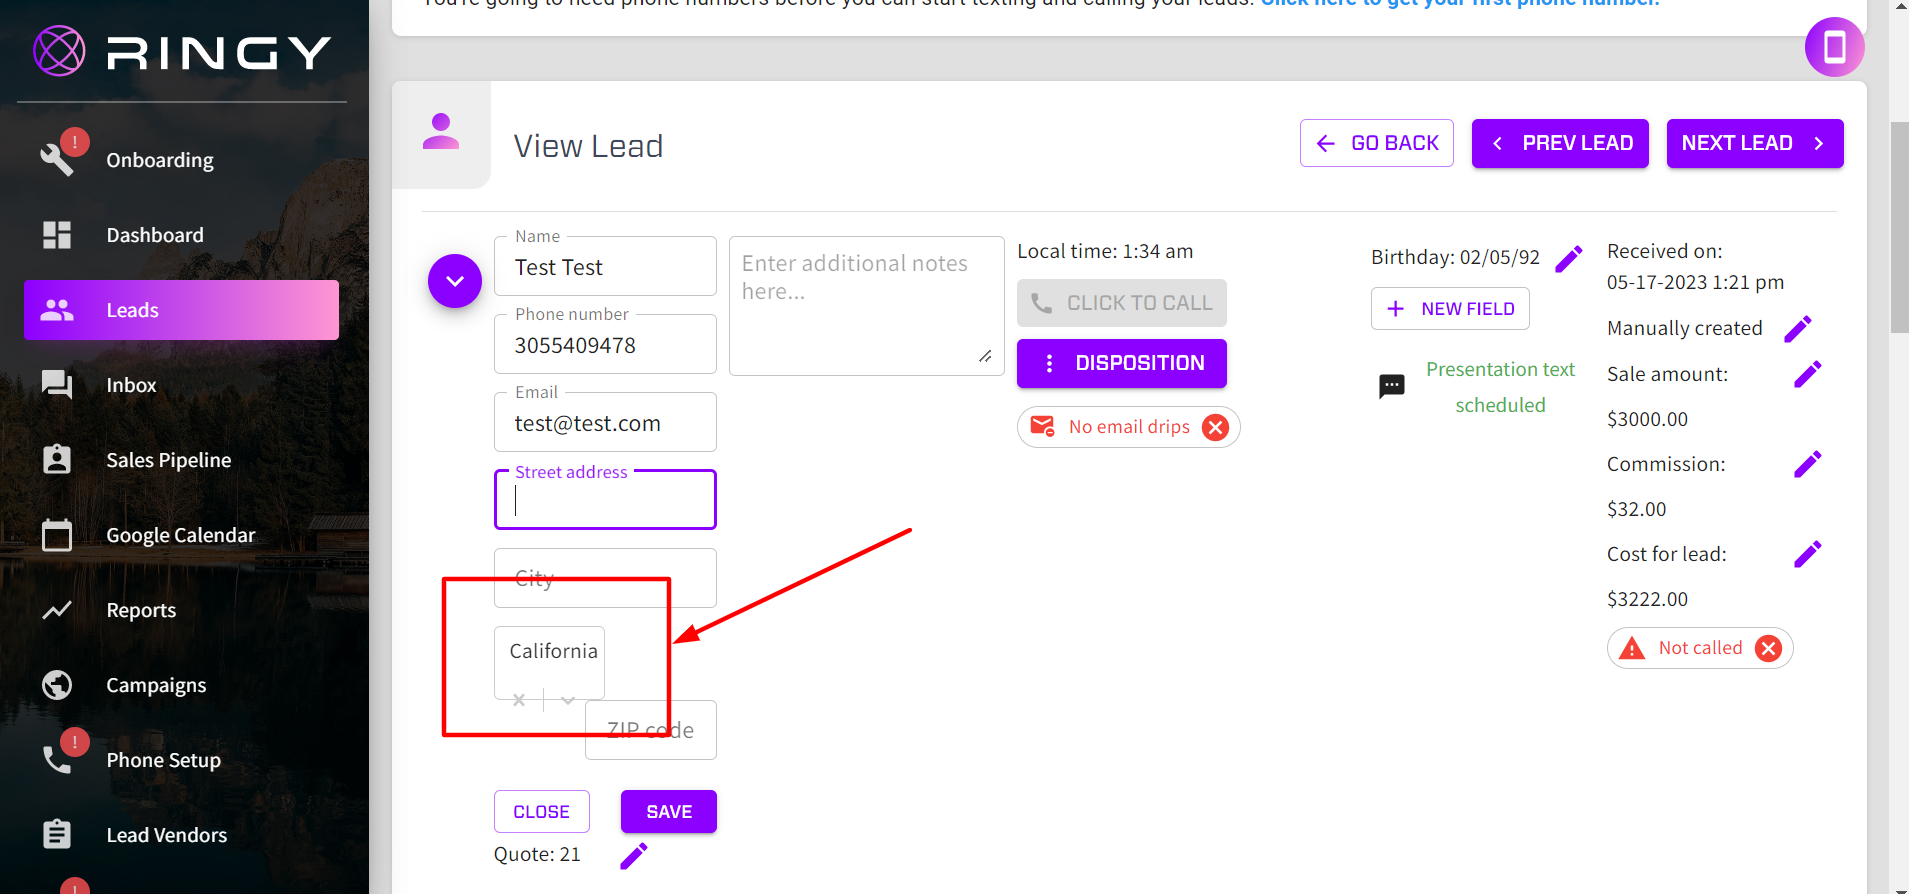 When selecting state for lead, field buttons extend beyond box